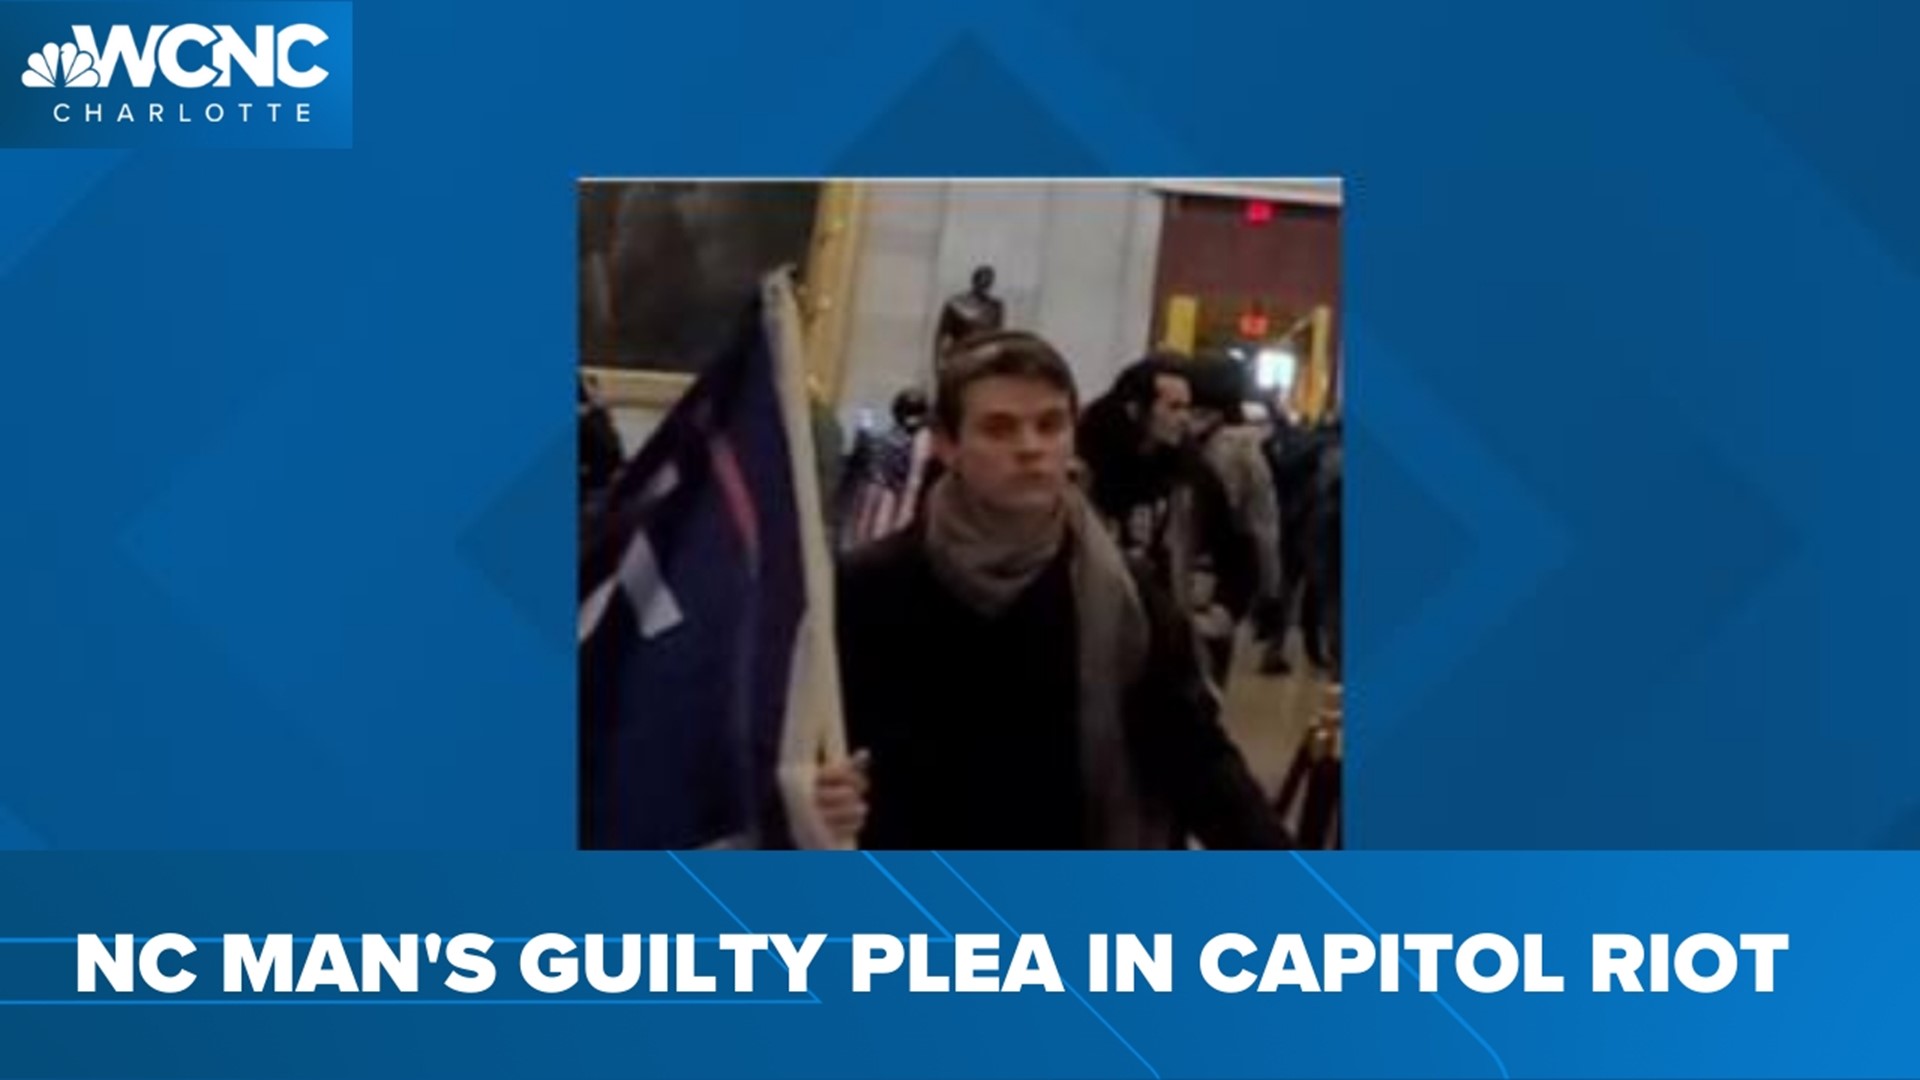 Matthew Wood, from the Greensboro area, pleaded guilty to all six counts he faced for storming the Capitol on January sixth.